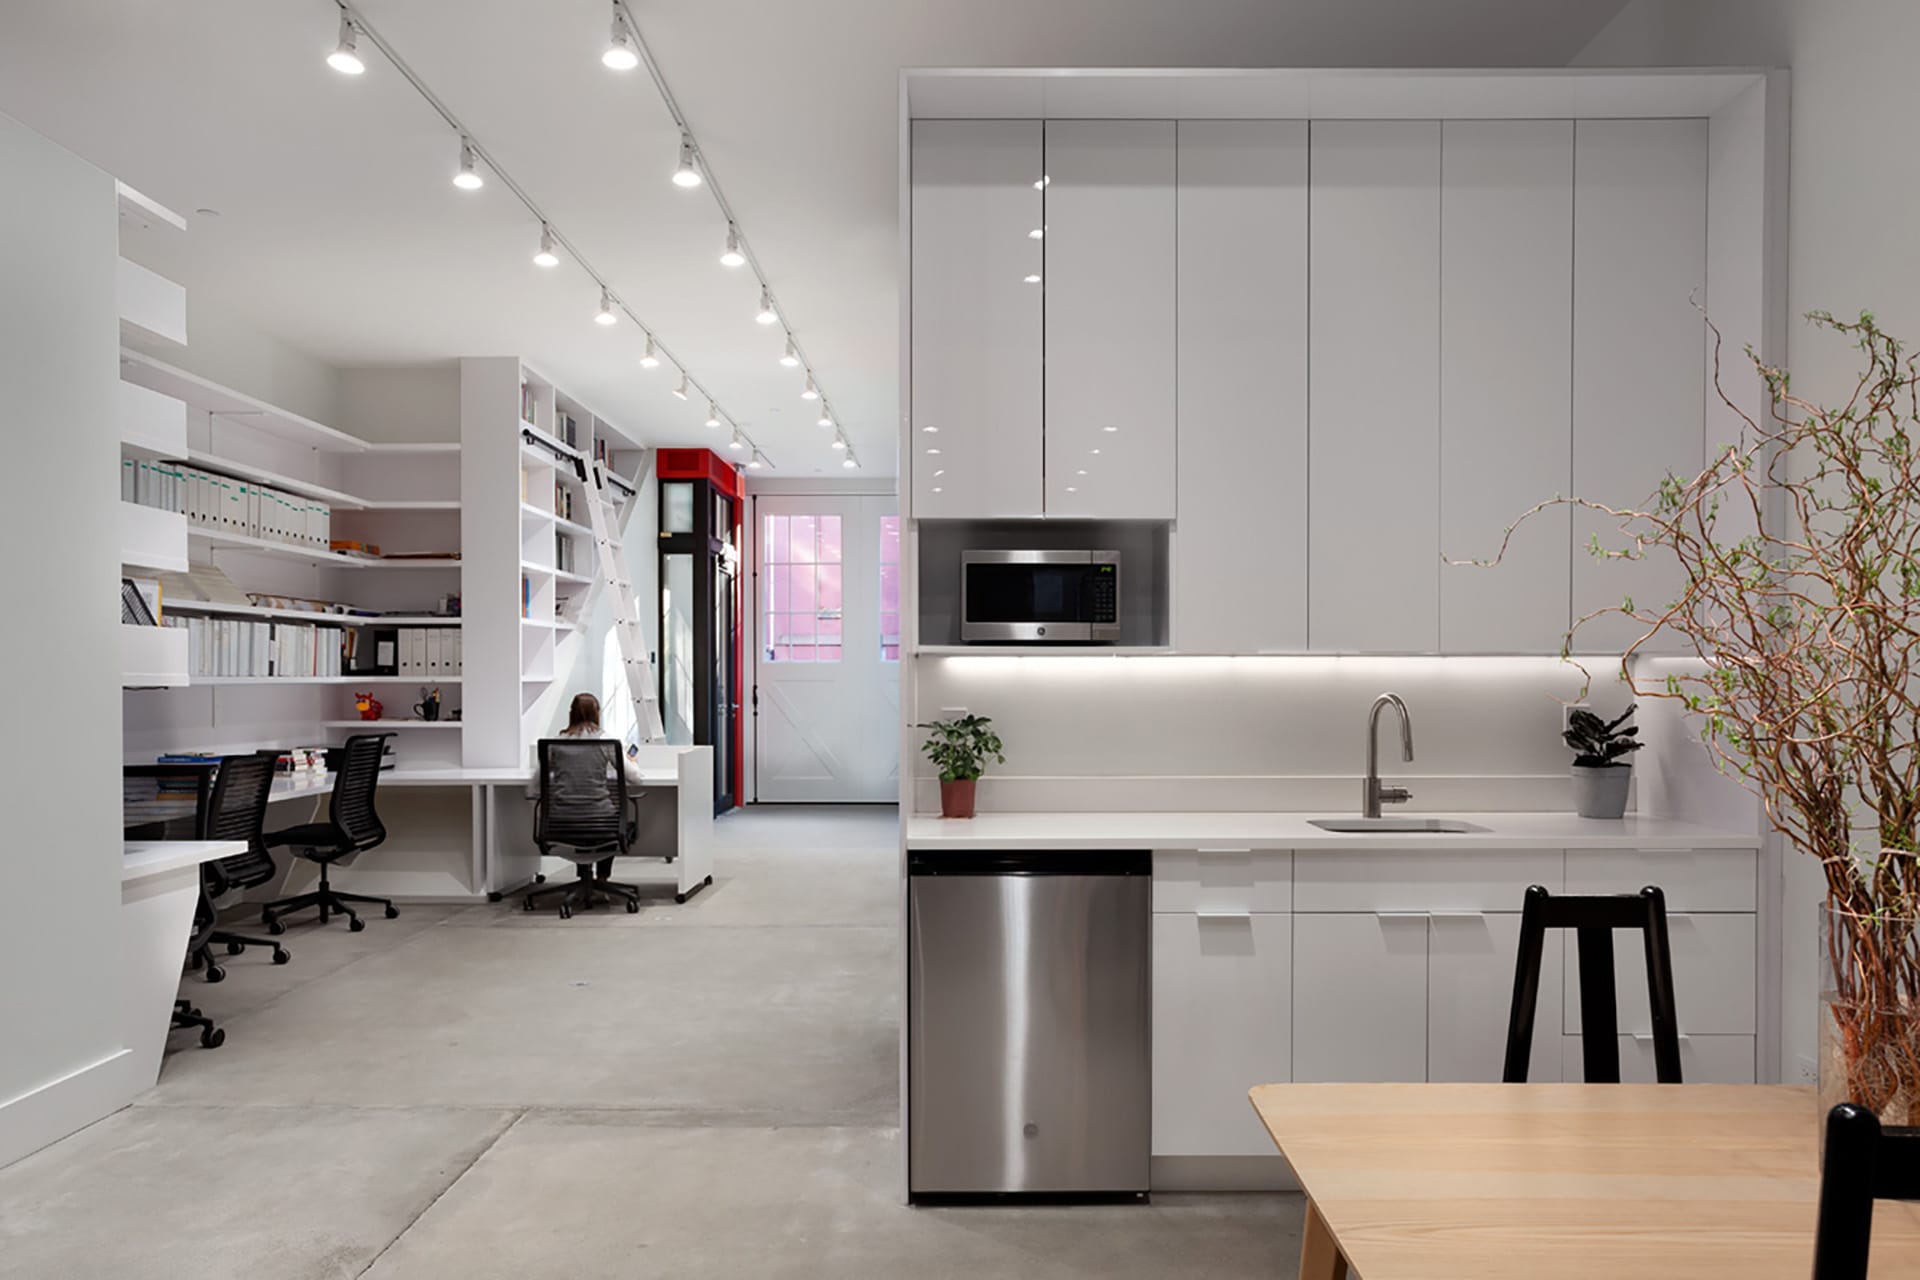 All-white kitchenette and office space with cement floors and a pop of red paint surrounding the front door.